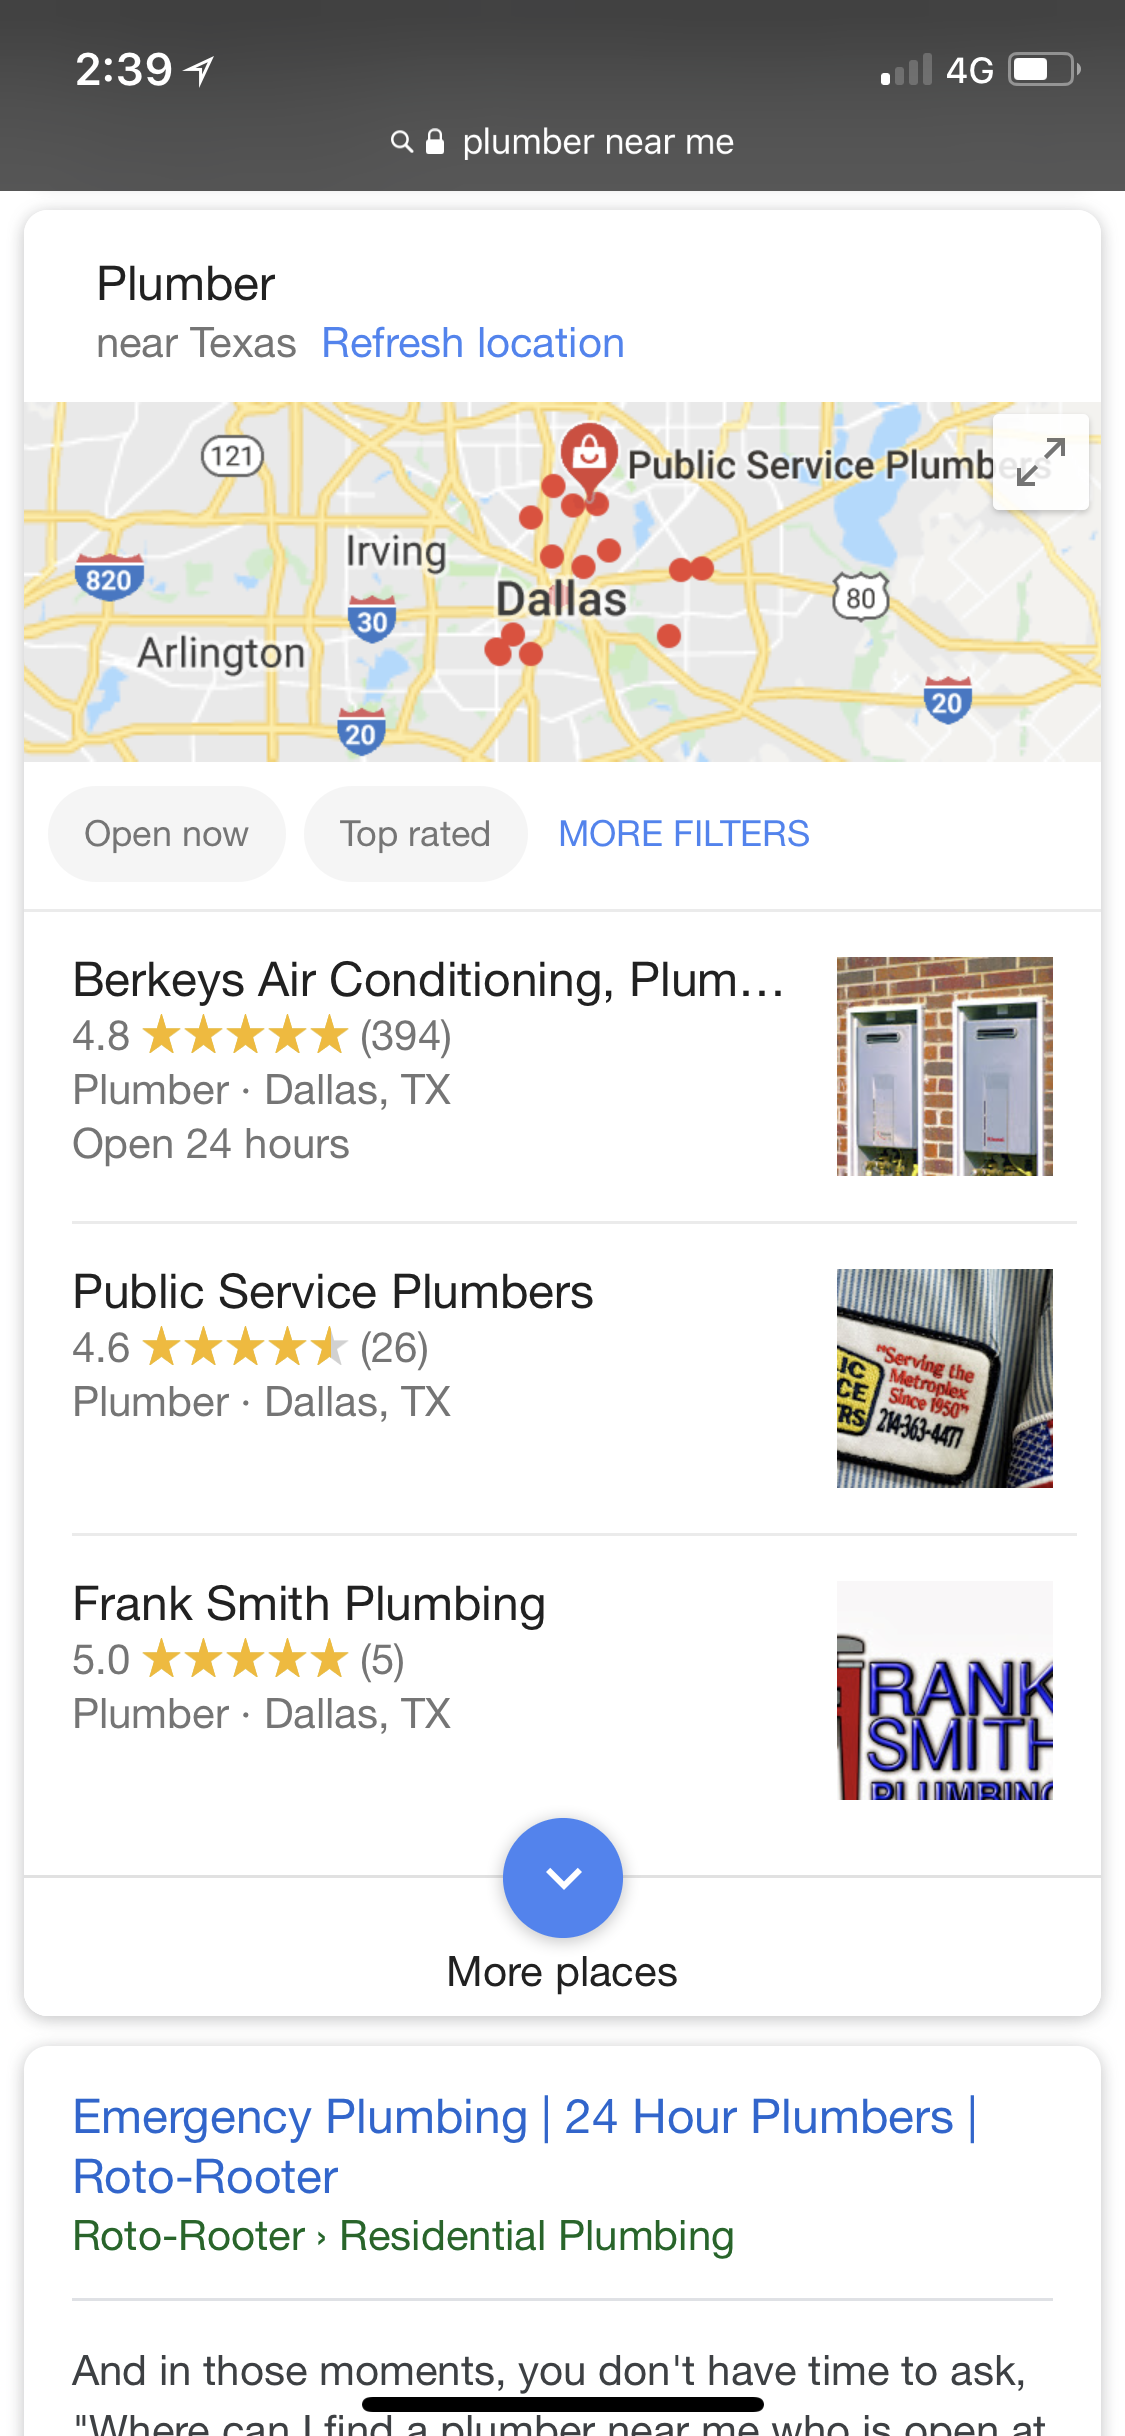 Google's local pack example